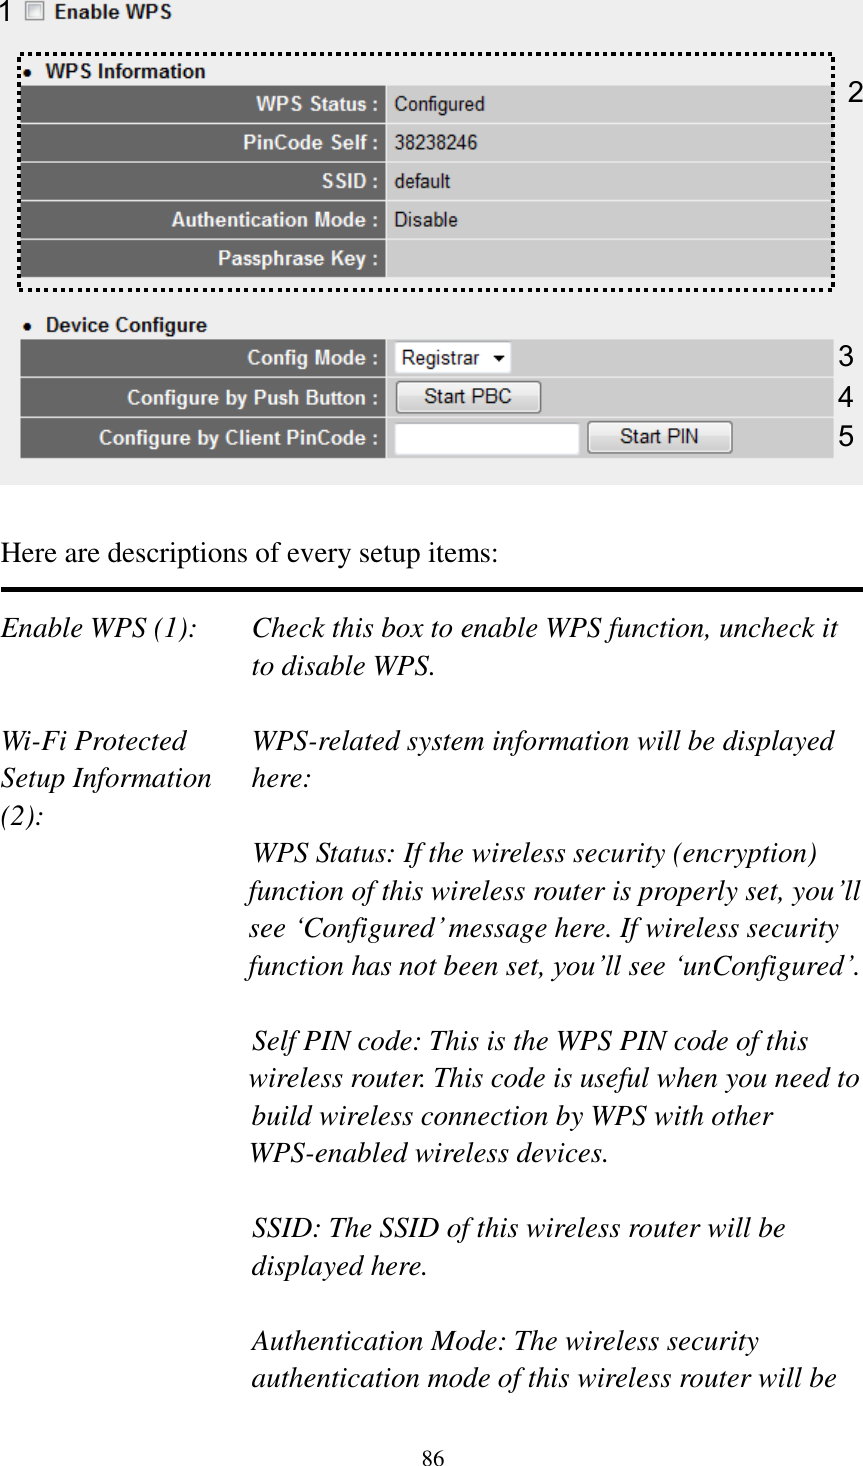 86   Here are descriptions of every setup items:  Enable WPS (1):  Check this box to enable WPS function, uncheck it to disable WPS.  Wi-Fi Protected    WPS-related system information will be displayed   Setup Information  here: (2): WPS Status: If the wireless security (encryption) function of this wireless router is properly set, you‟ll see „Configured‟ message here. If wireless security function has not been set, you‟ll see „unConfigured‟.  Self PIN code: This is the WPS PIN code of this wireless router. This code is useful when you need to  build wireless connection by WPS with other WPS-enabled wireless devices.  SSID: The SSID of this wireless router will be displayed here.  Authentication Mode: The wireless security authentication mode of this wireless router will be 1 3 4 2 5 